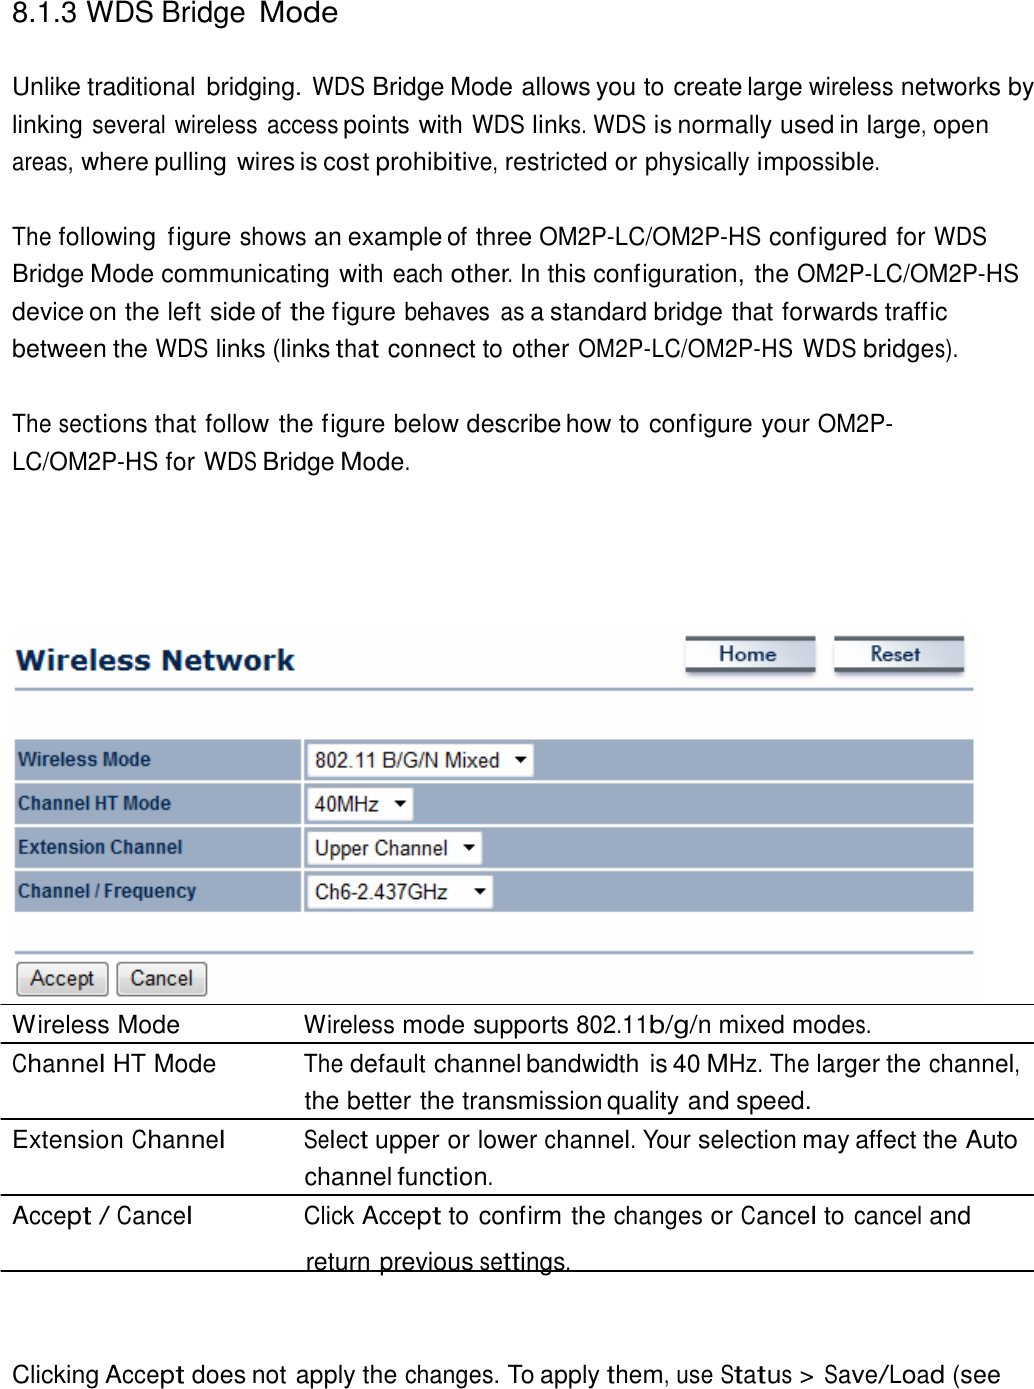  8.1.3 WDS Bridge Mode   Unlike traditional  bridging. WDS Bridge Mode allows you to create large wireless networks by linking several wireless access points with WDS links. WDS is normally used in large, open areas, where pulling wires is cost prohibitive, restricted or physically impossible.   The following  figure shows an example of three OM2P-LC/OM2P-HS configured for WDS Bridge Mode communicating with each other. In this configuration, the OM2P-LC/OM2P-HS device on the left side of the figure behaves  as a standard bridge that forwards traffic between the WDS links (links that connect to other OM2P-LC/OM2P-HS WDS bridges).  The sections that follow the figure below describe how to configure your OM2P-LC/OM2P-HS for WDS Bridge Mode.                           Wireless Mode  Wireless mode supports 802.11b/g/n mixed modes. Channel HT Mode  The default channel bandwidth is 40 MHz. The larger the channel, the better the transmission quality and speed. Extension Channel Select upper or lower channel. Your selection may affect the Auto channel function. Accept / Cancel Click Accept to confirm the changes or Cancel to cancel and return previous settings.     Clicking Accept does not apply the changes. To apply them, use Status &gt; Save/Load (see 